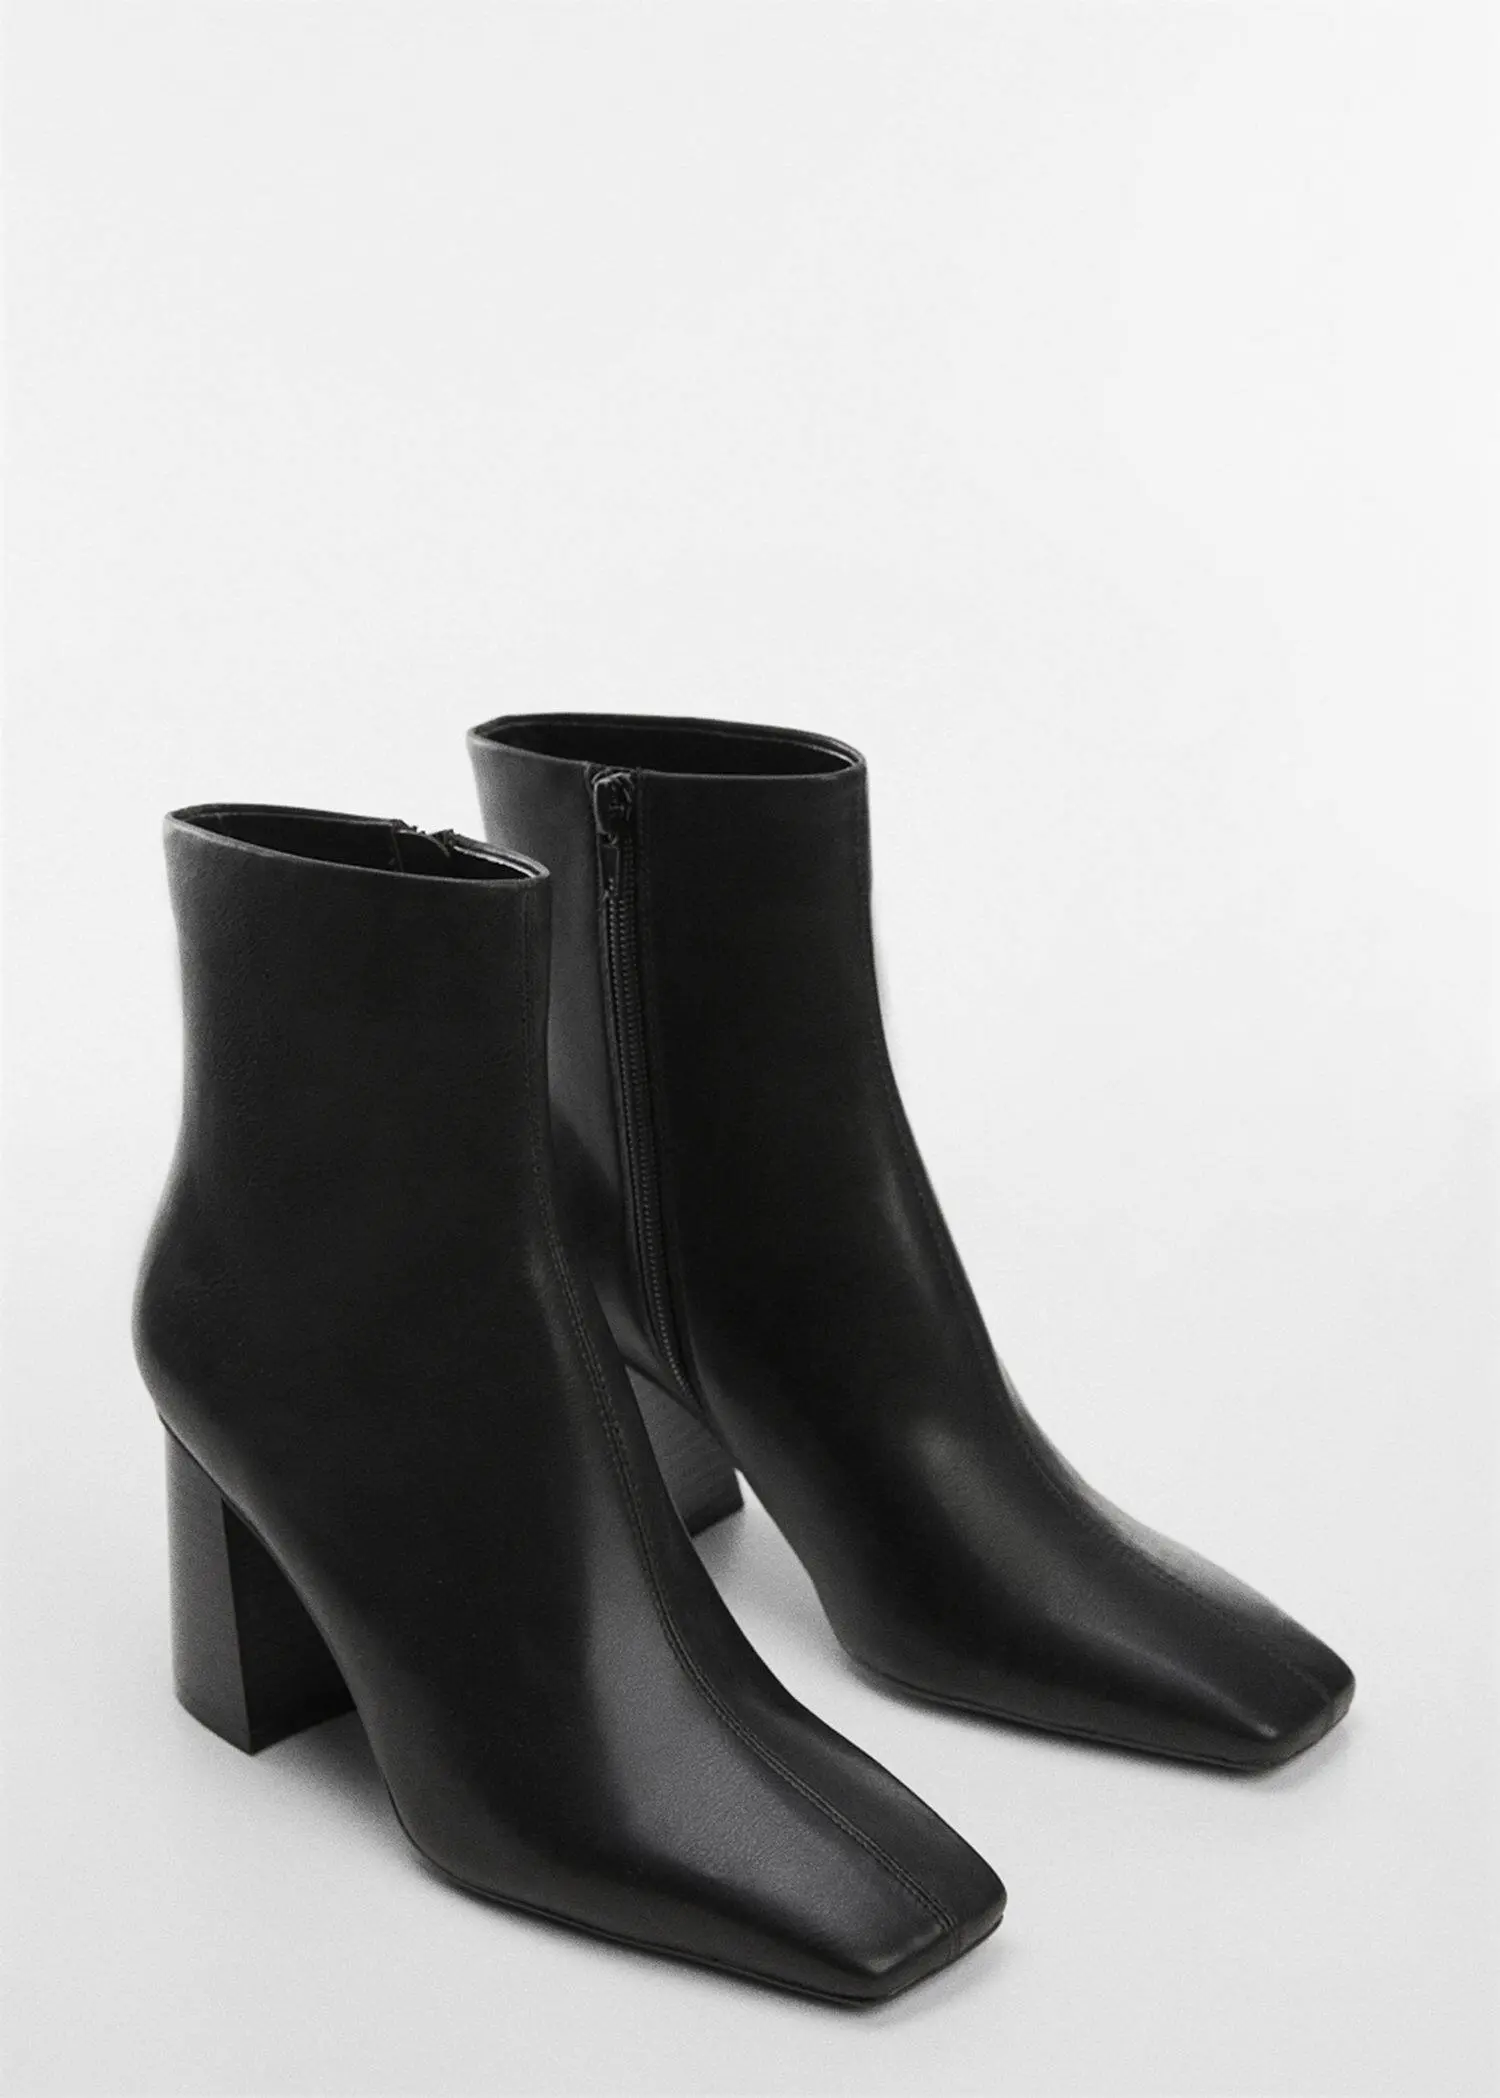 Mango Ankle boots with square toe heel. 2